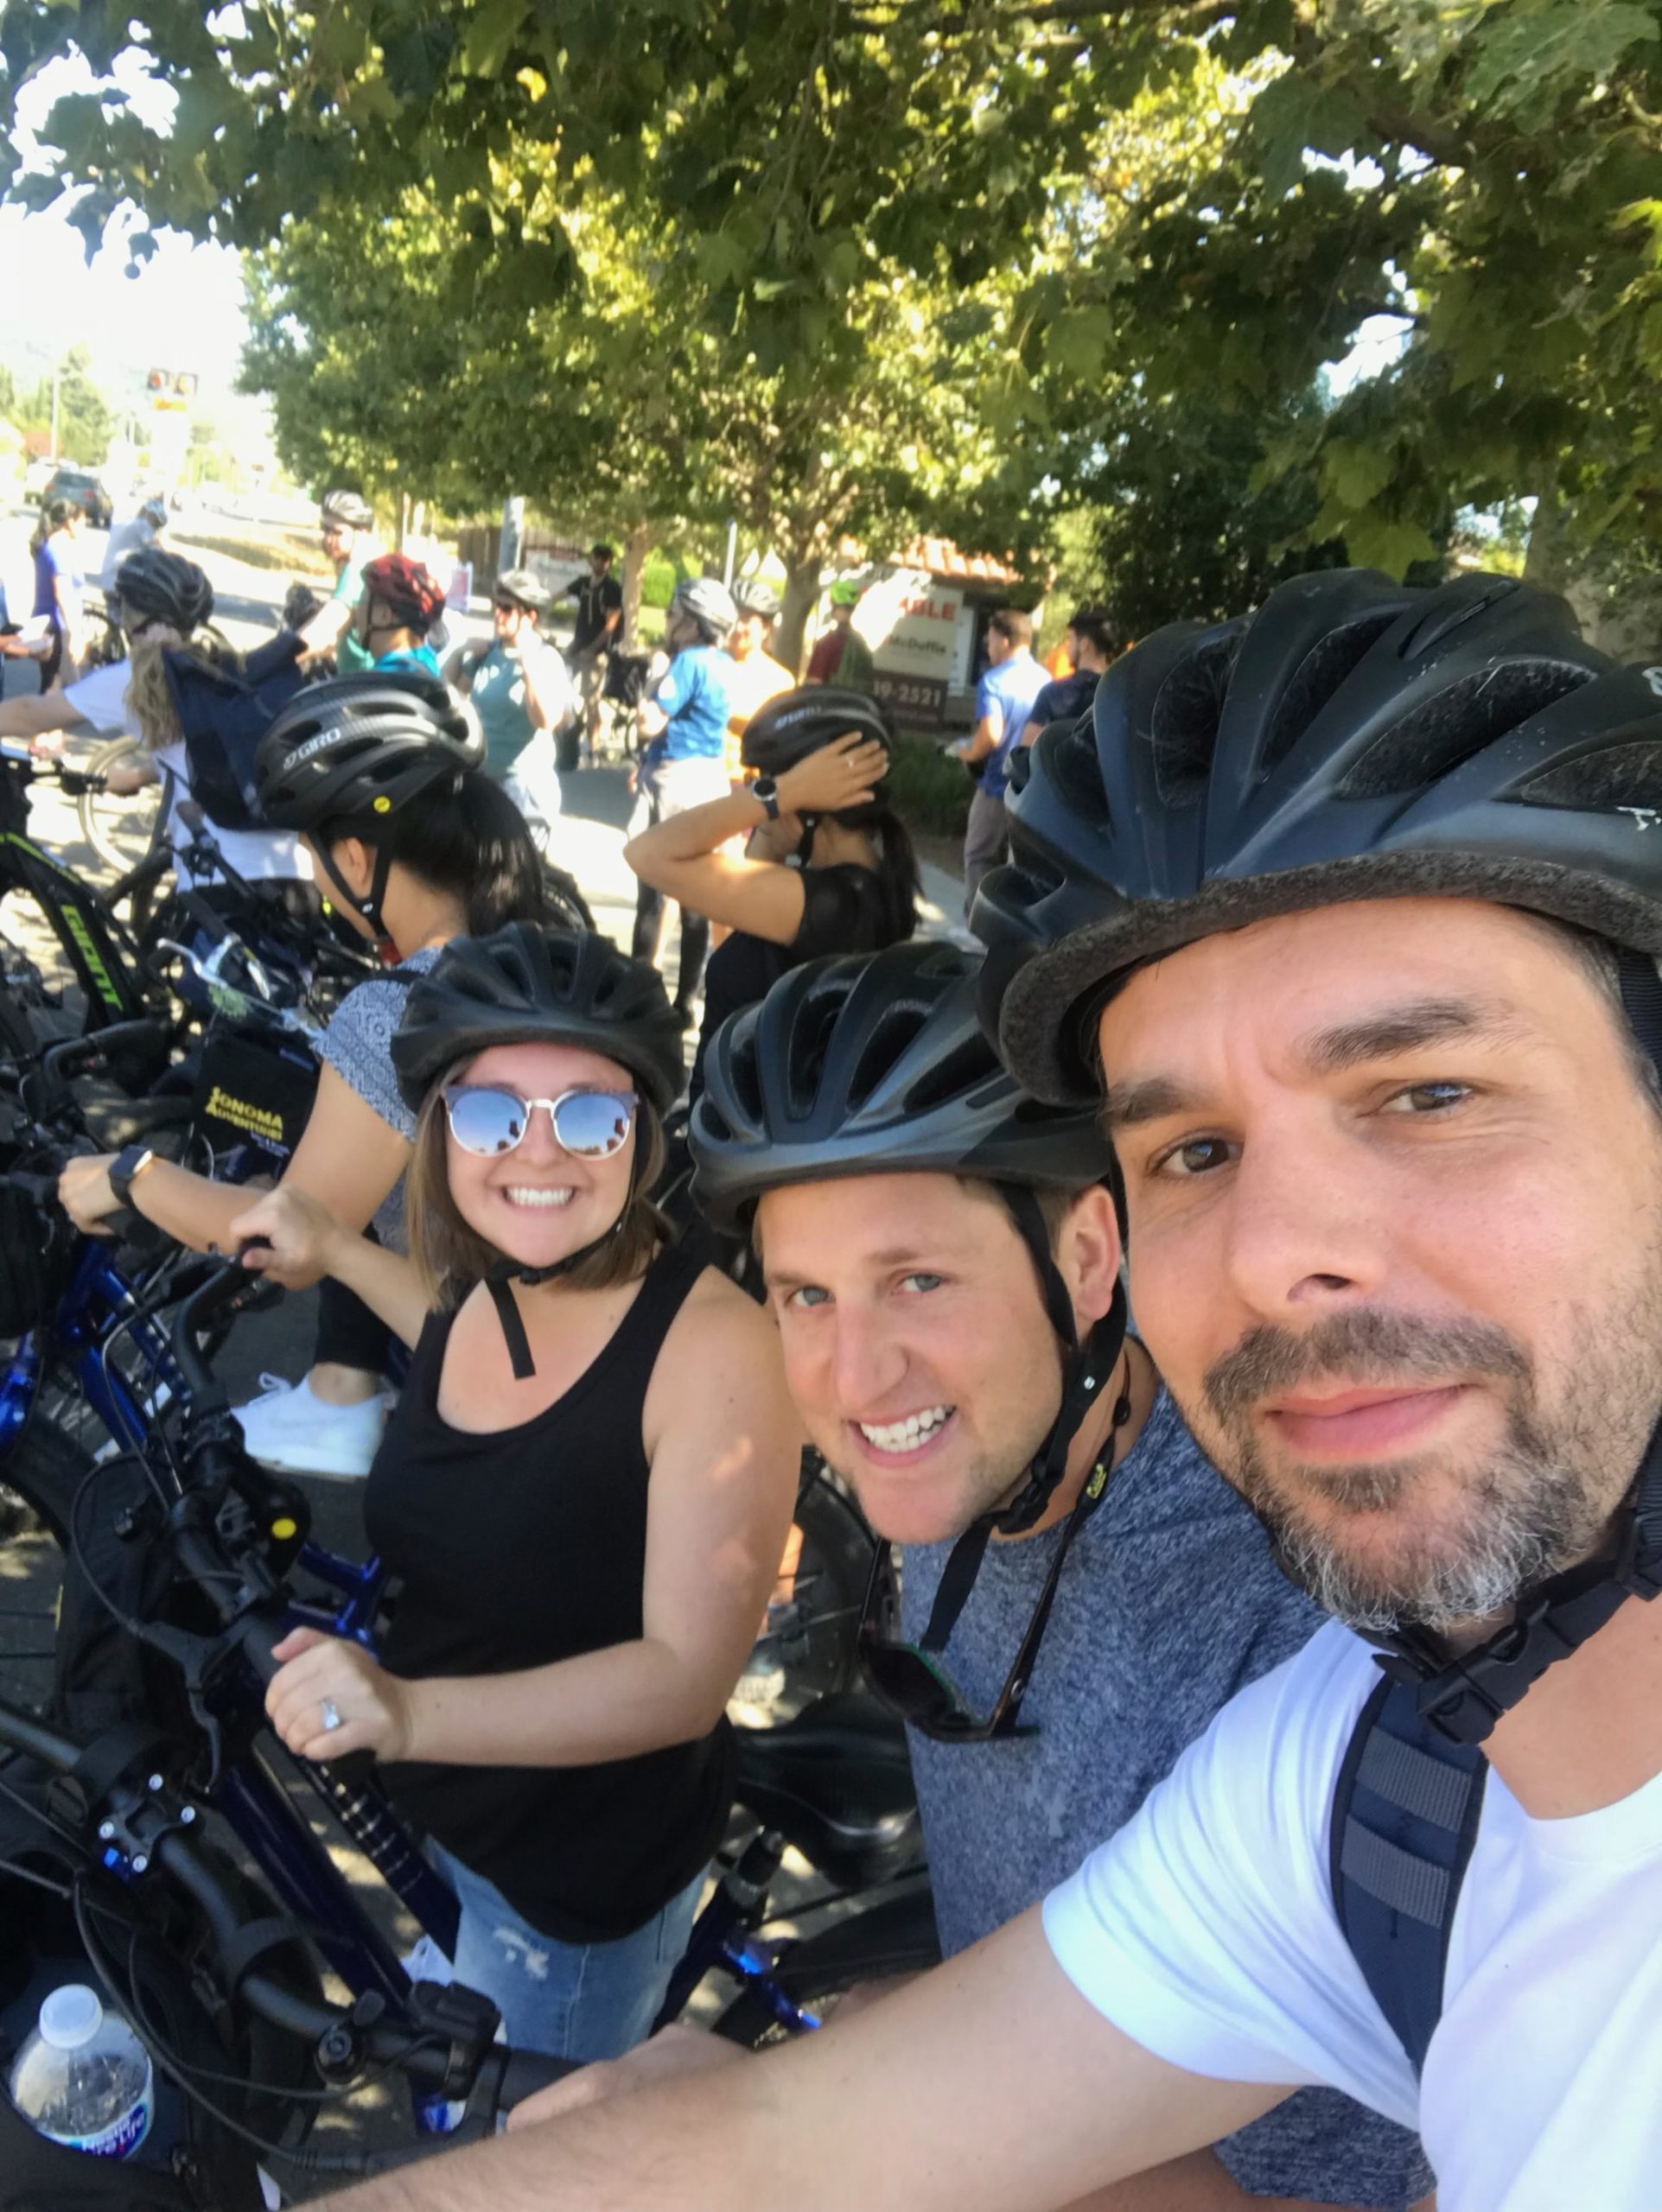 FormAssembly team members gather for a photo on a bike tour of Sonoma at the 2019 company reunion.